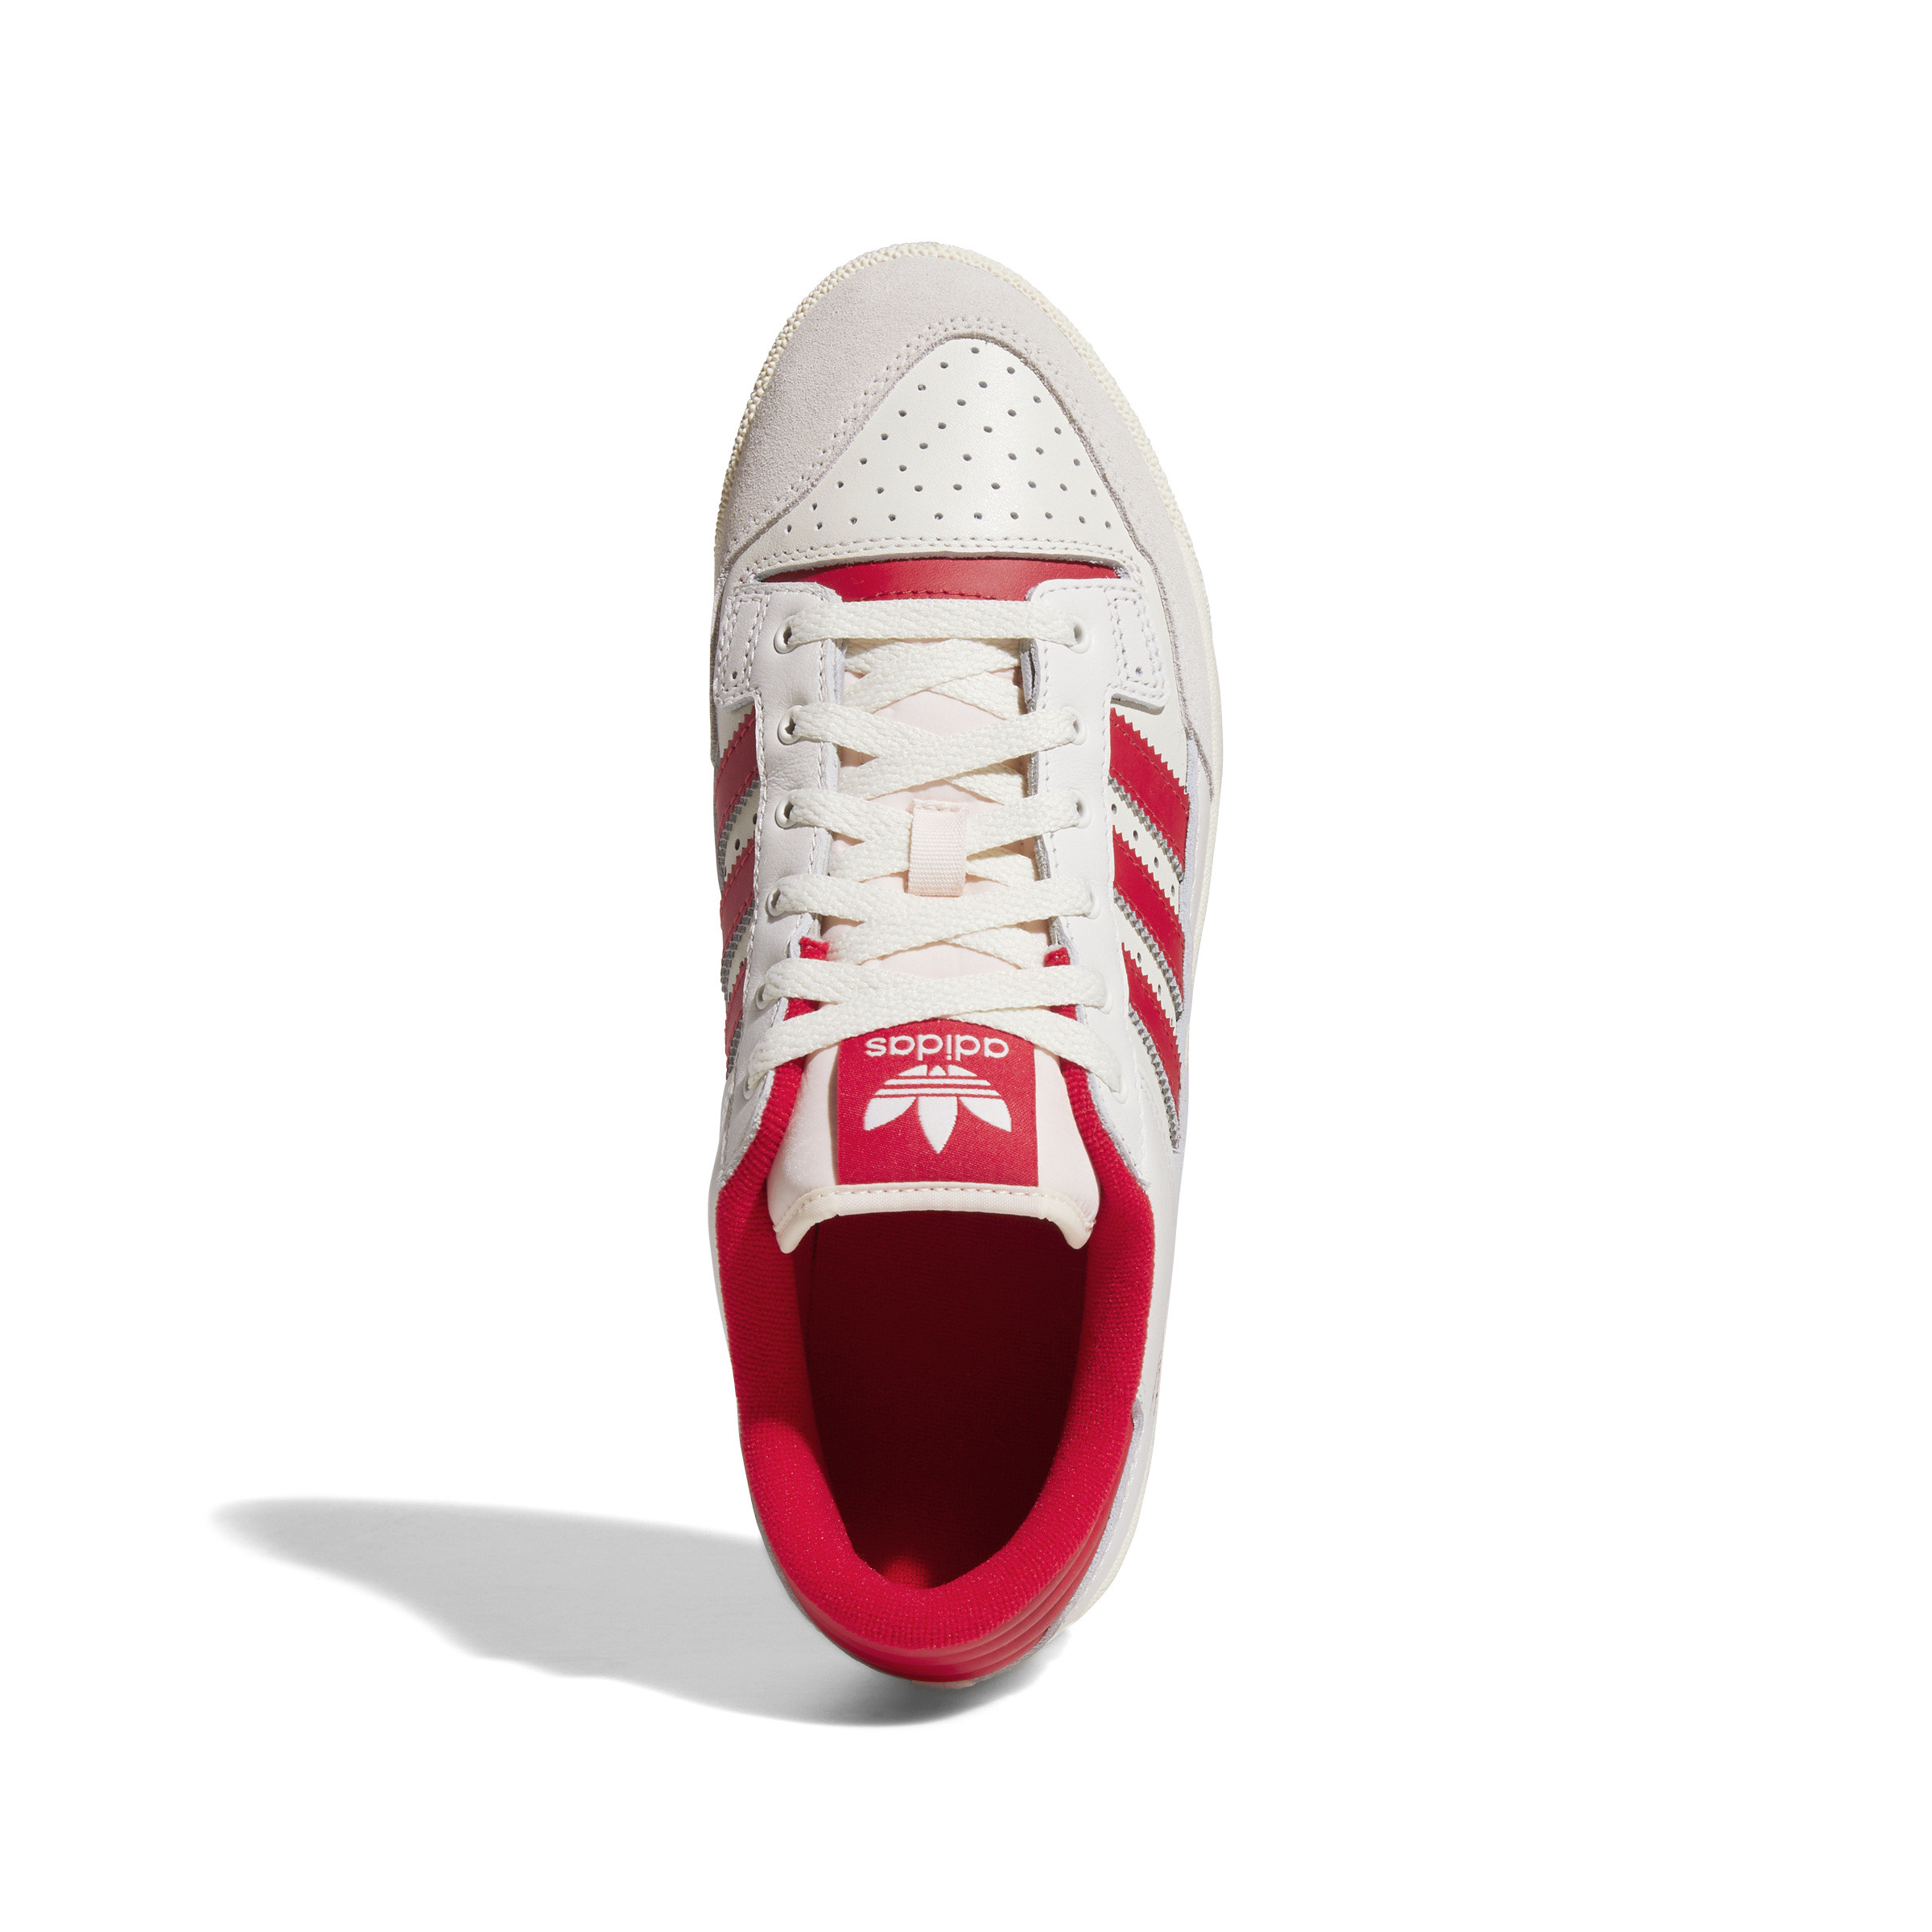 Adidas - Centennial 85 low shoes, White, large image number 2